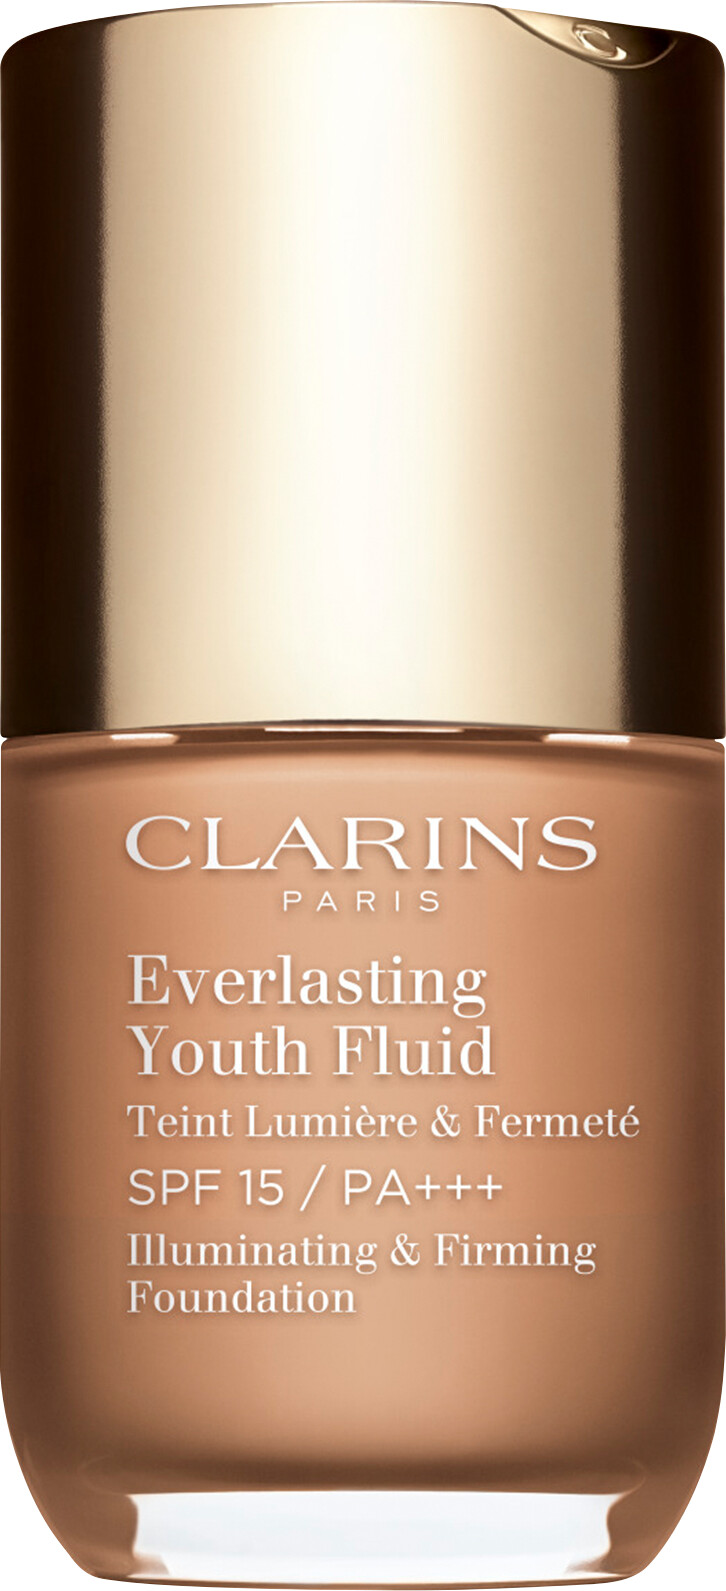 Clarins Everlasting Youth Fluid Illuminating and Firming Foundation SPF15 30ml 112 - Amber